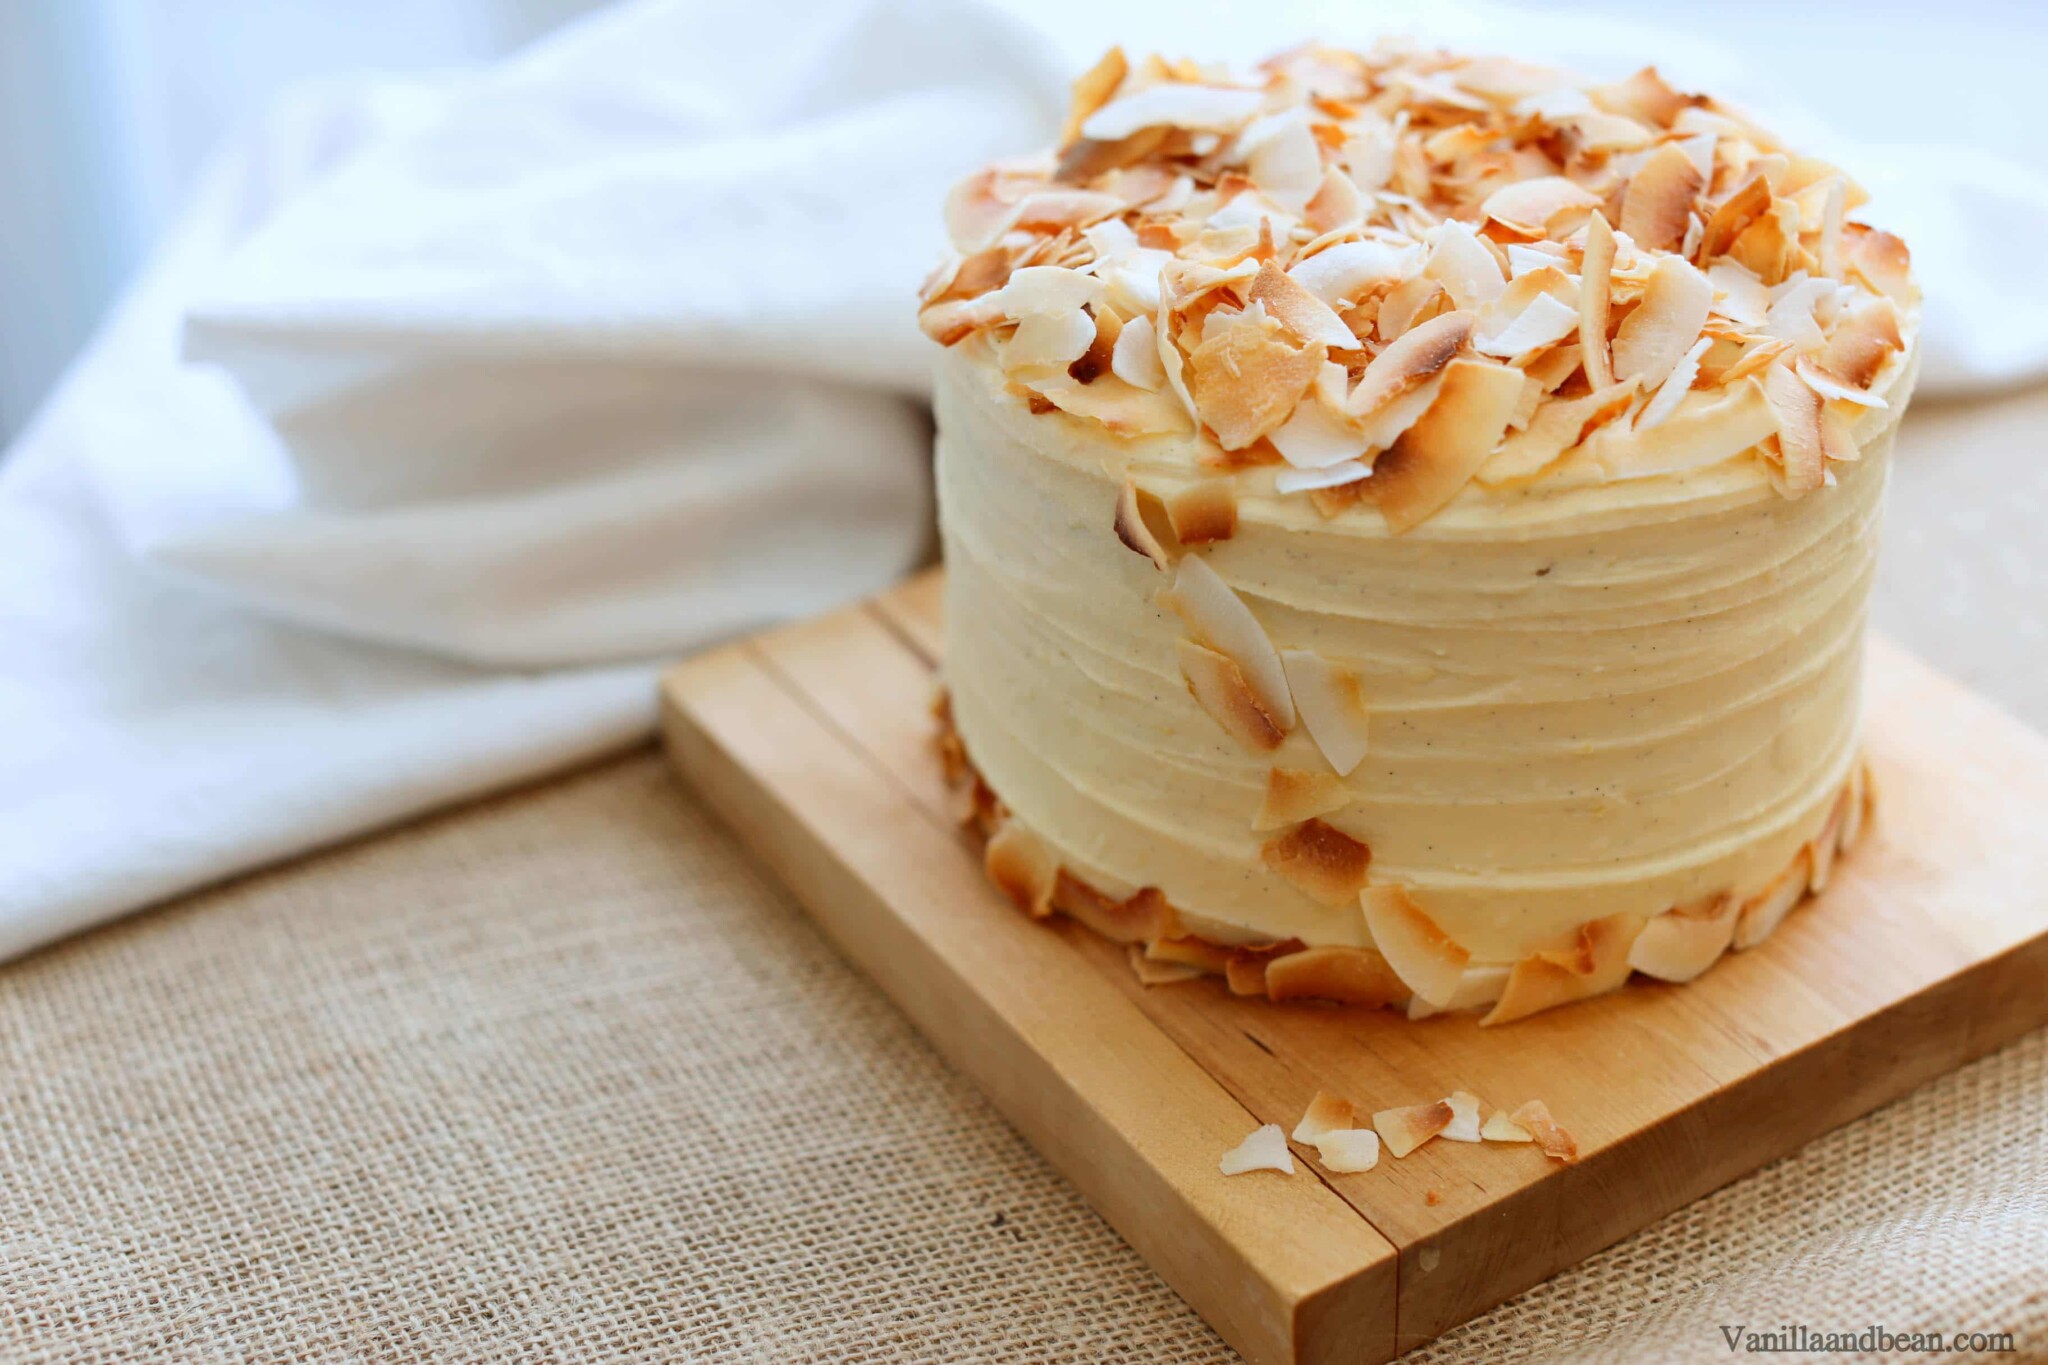 Hummingbird Cake topped with coconut flakes setting on a cake board.